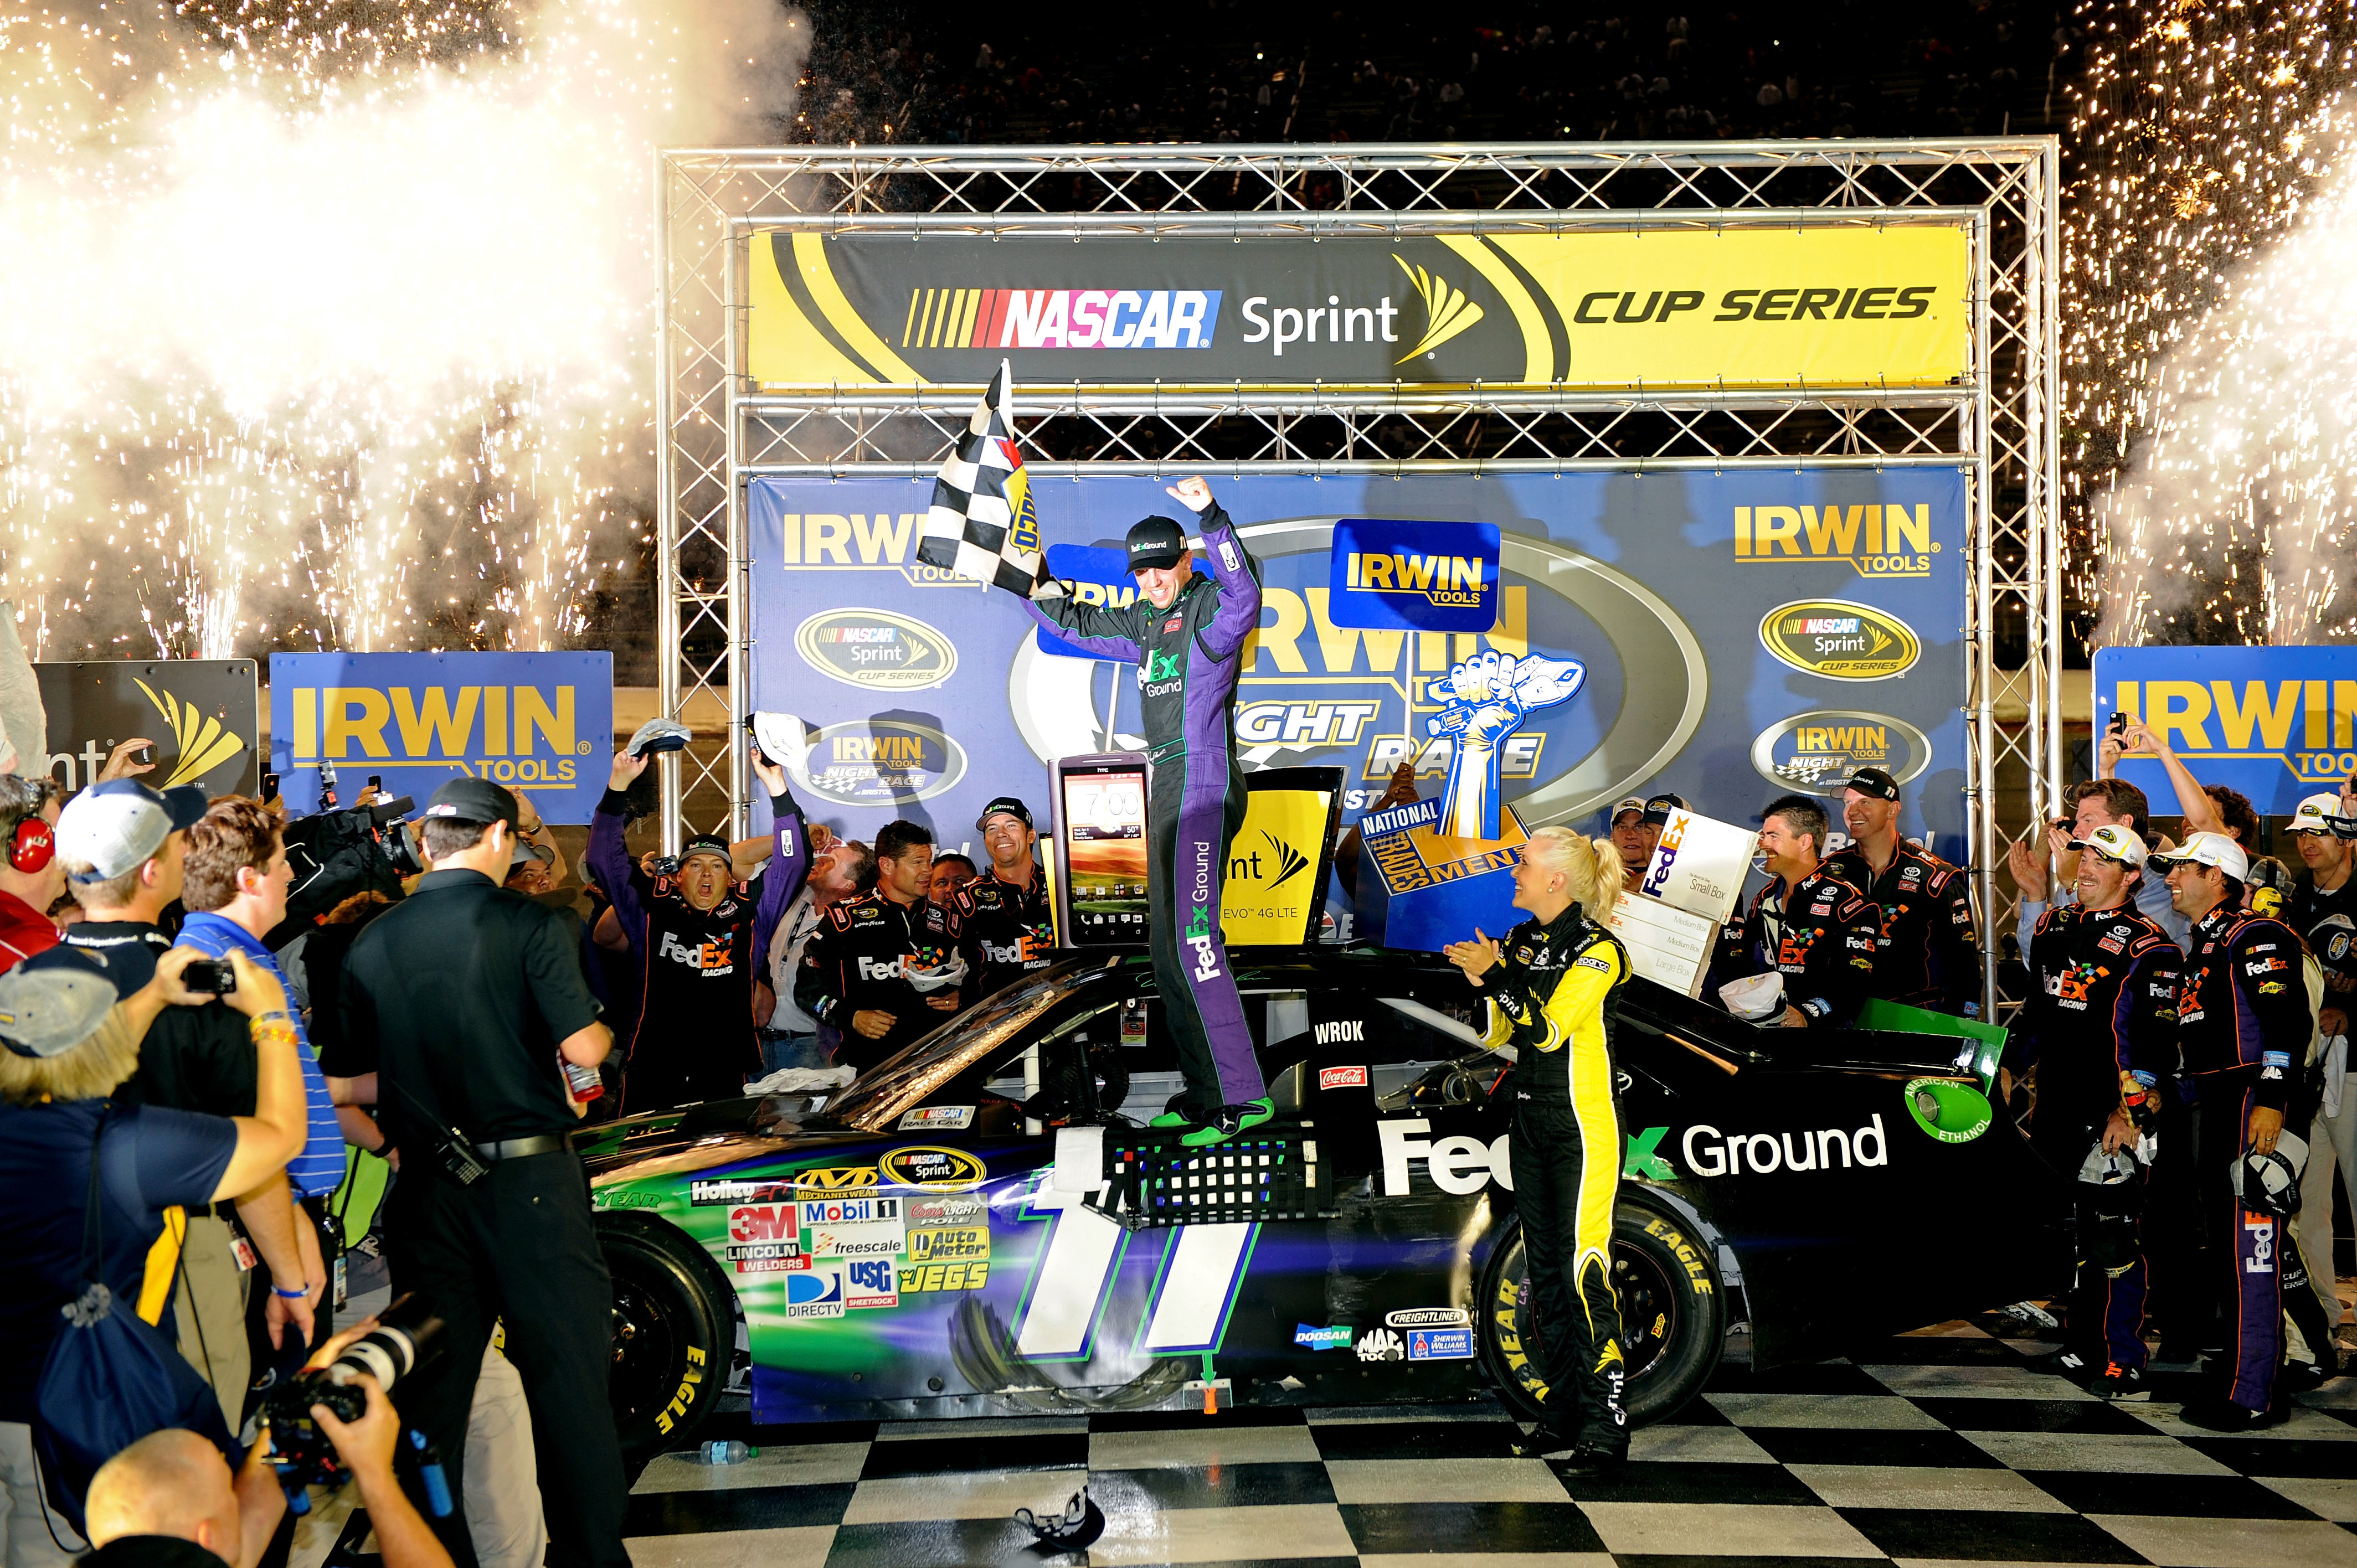 It was some beating, banging, and frustration that highlighted the night race at Bristol, and it was Denny Hamlin celebrating in the end.